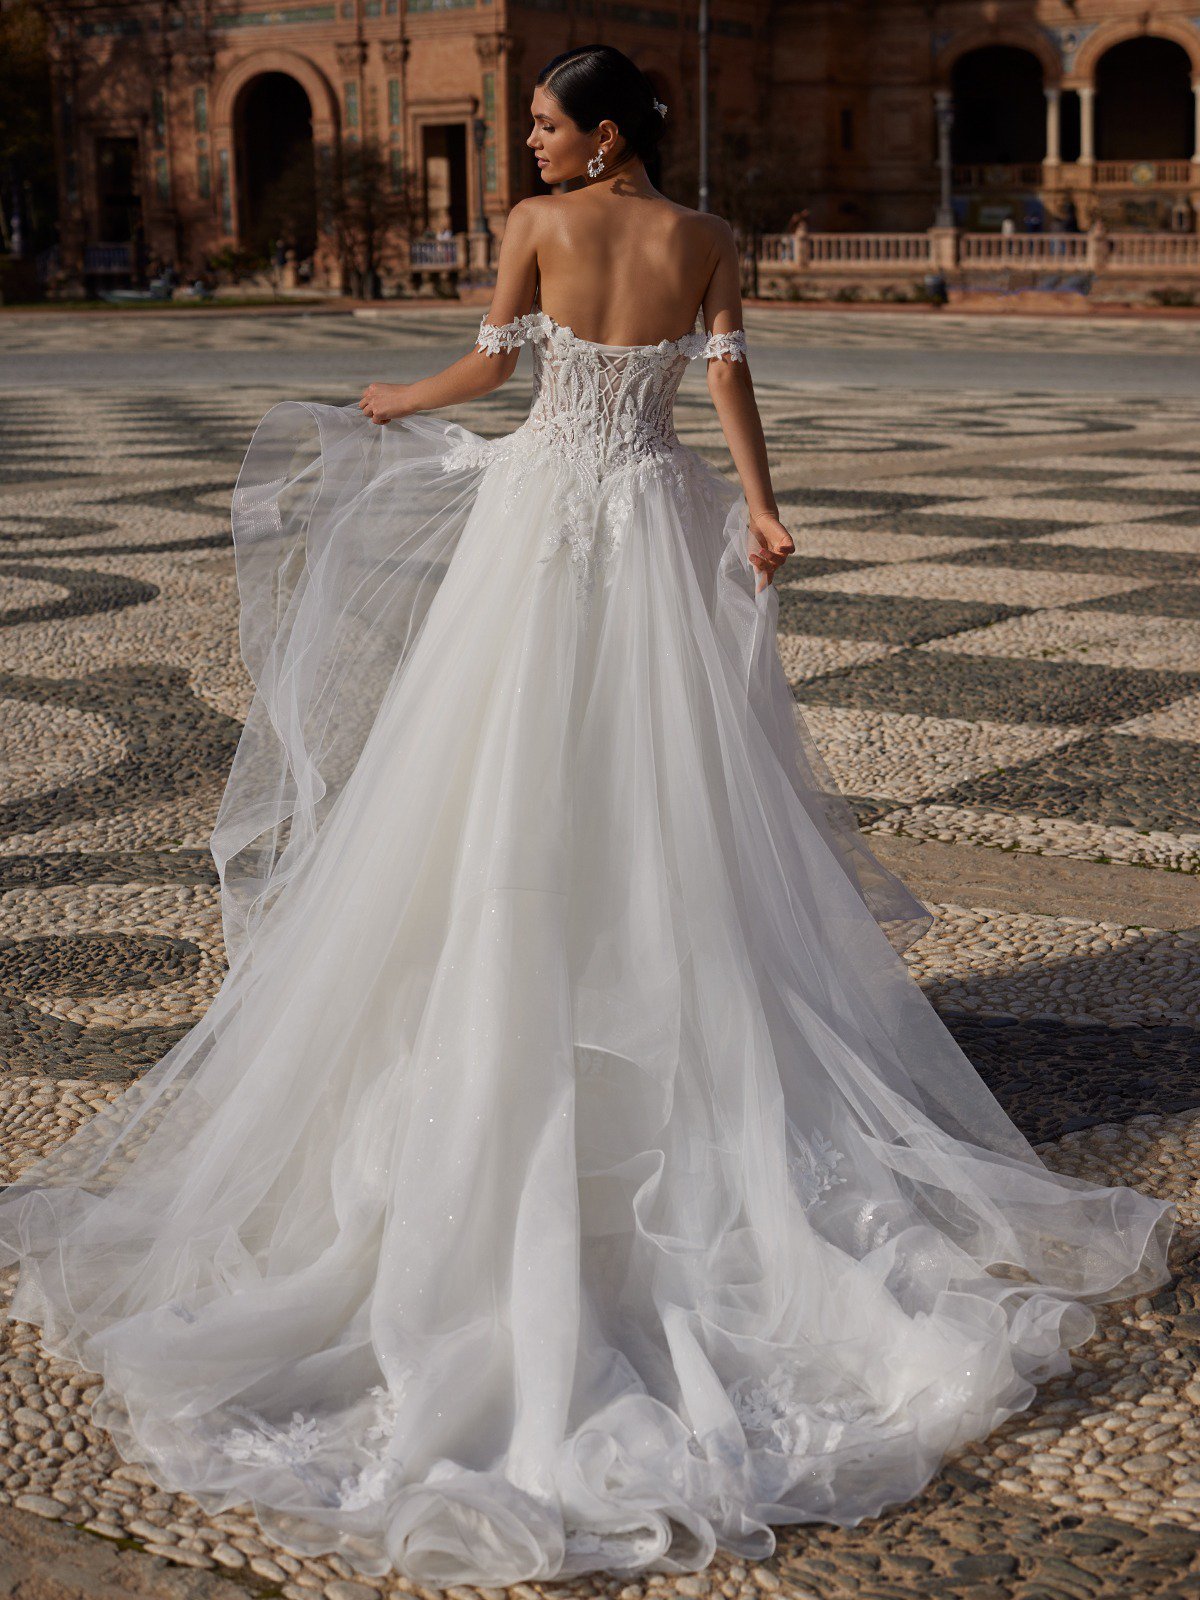 Sweetheart A-line Gown With Sleeves and a Cascading Skirt